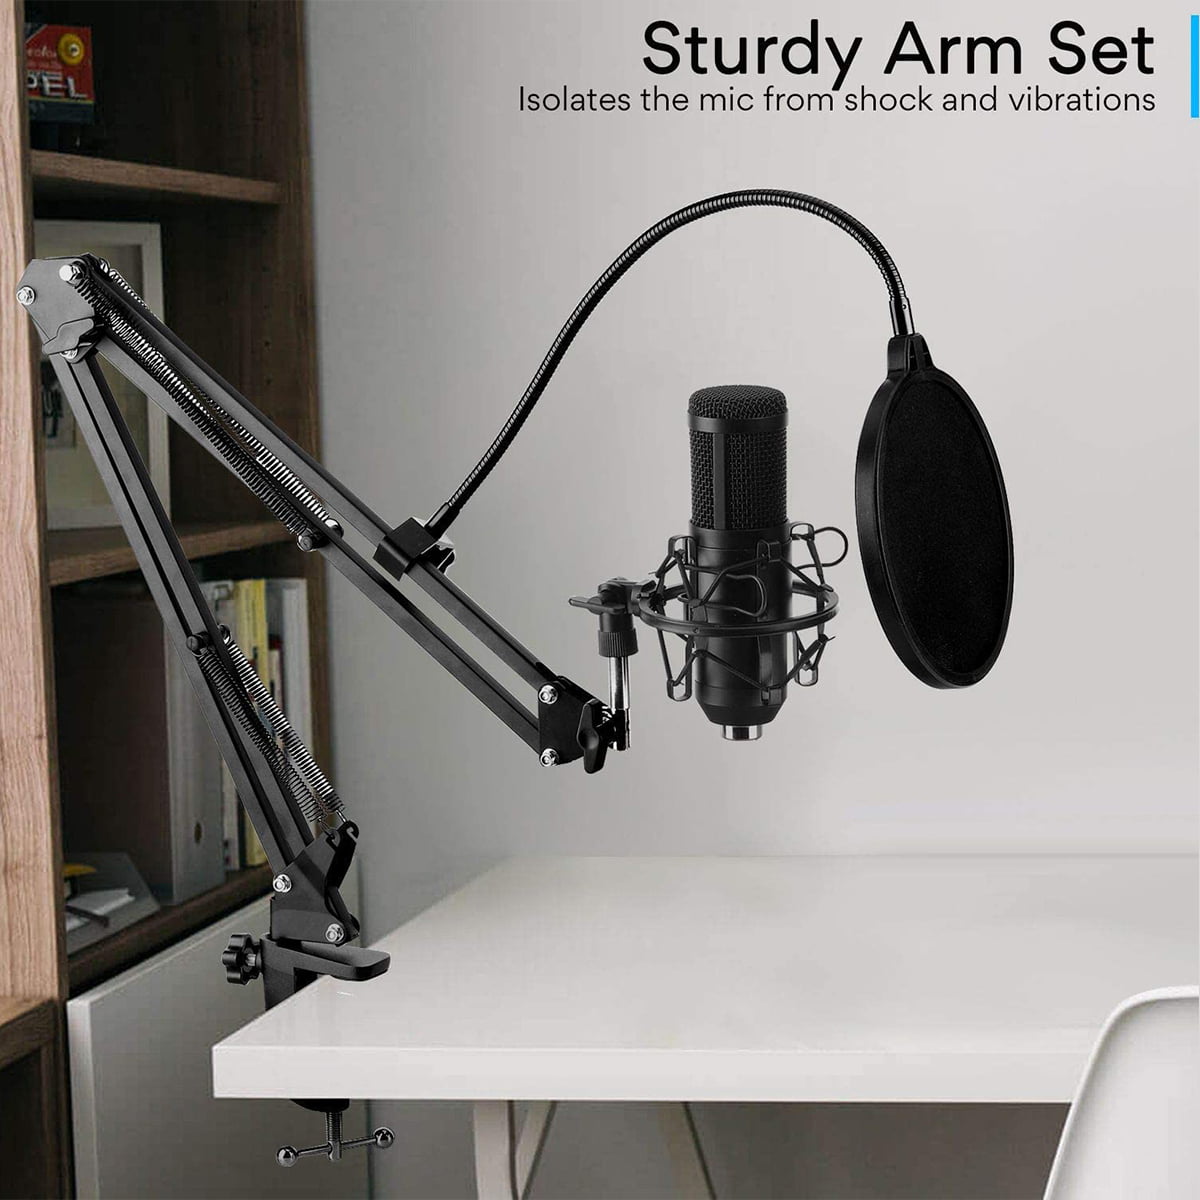 USB Streaming Podcast PC Microphone professional 192KHZ24Bit Studio  Cardioid Condenser Mic Kit with sound card Boom Arm Shock Mount Pop Filter  for Skype r Karaoke Gaming Recording 